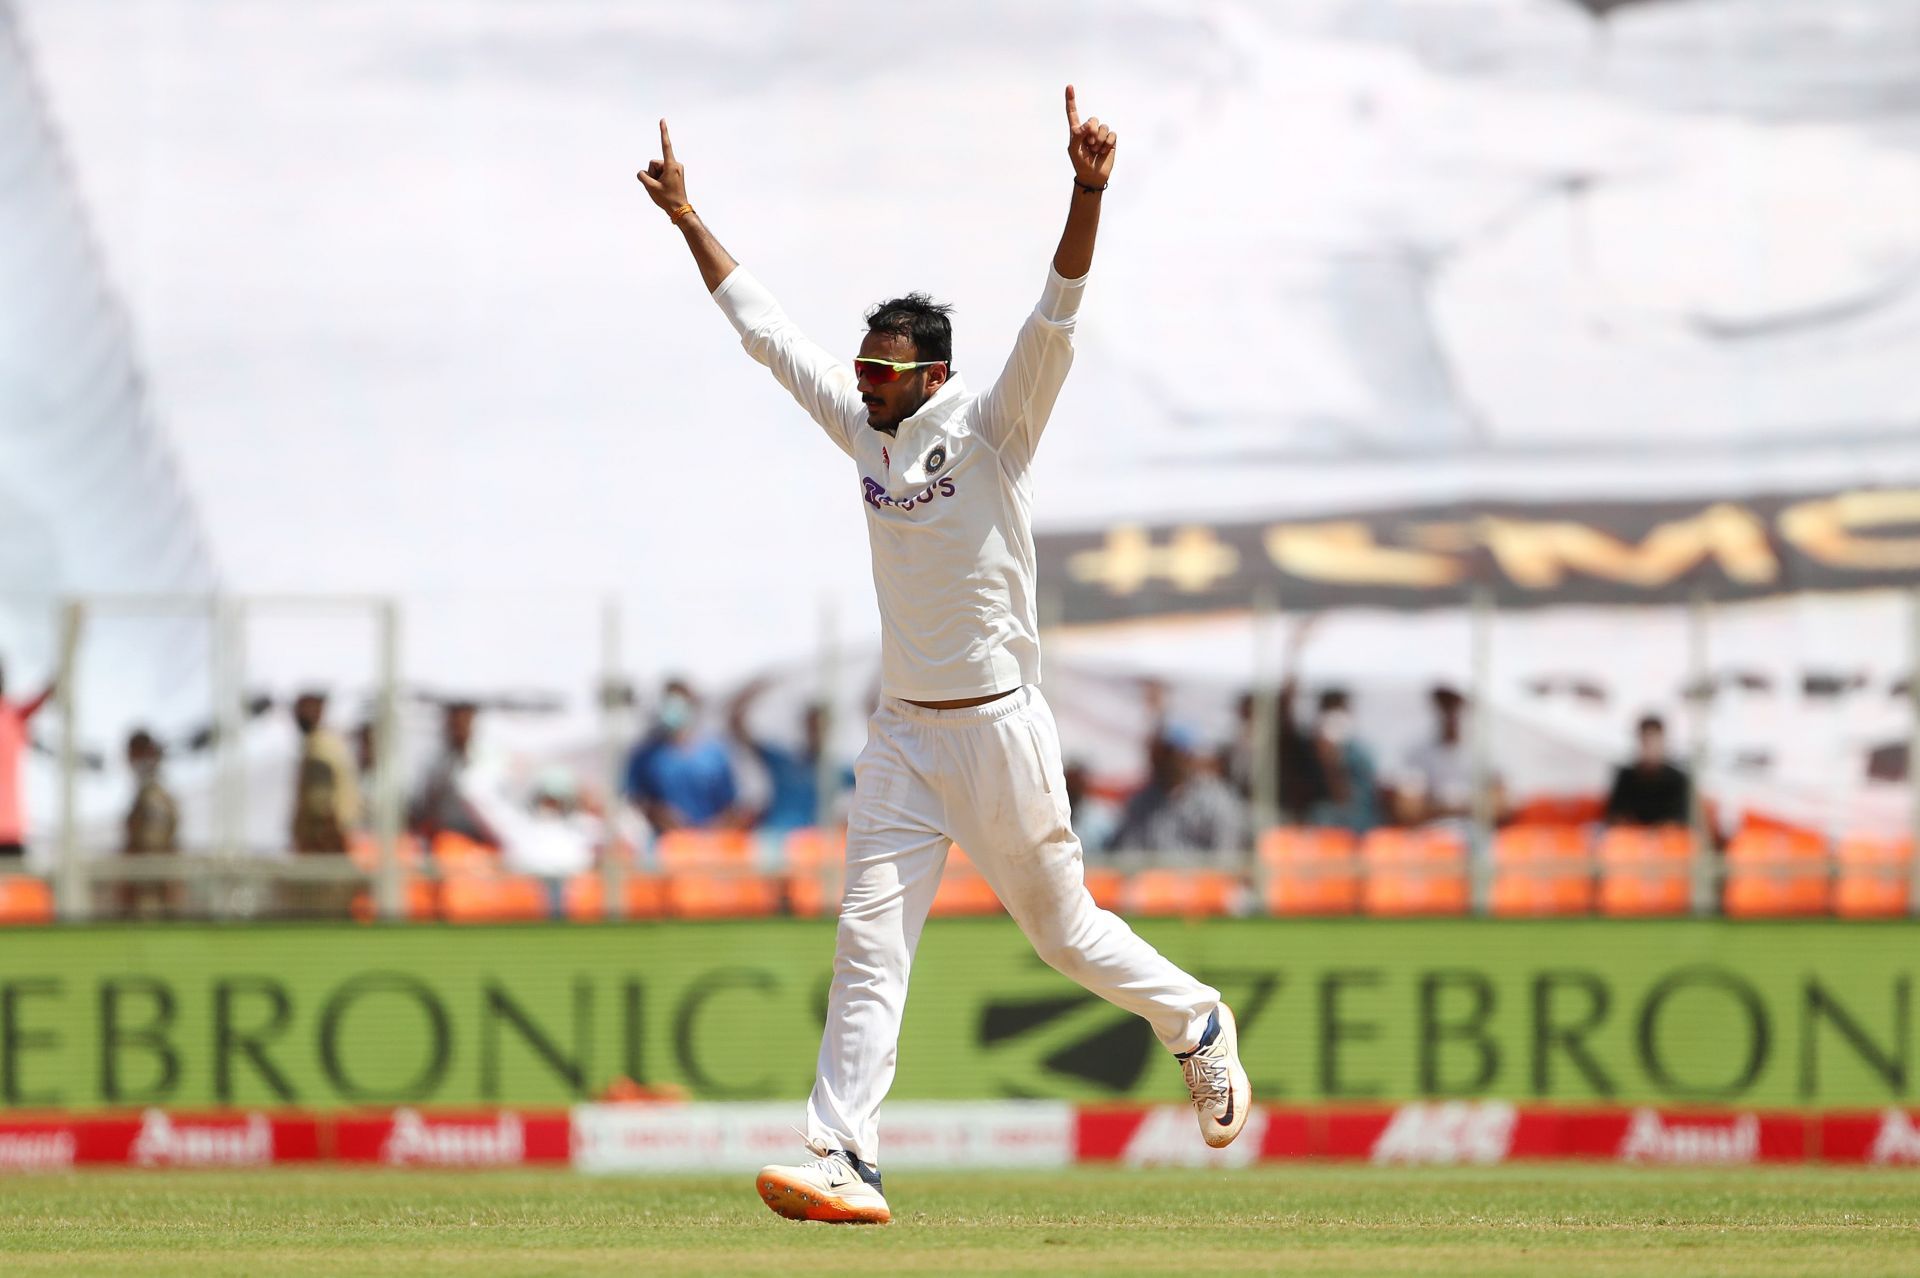 Axar Patel has an exceptional record with the ball in Test cricket.